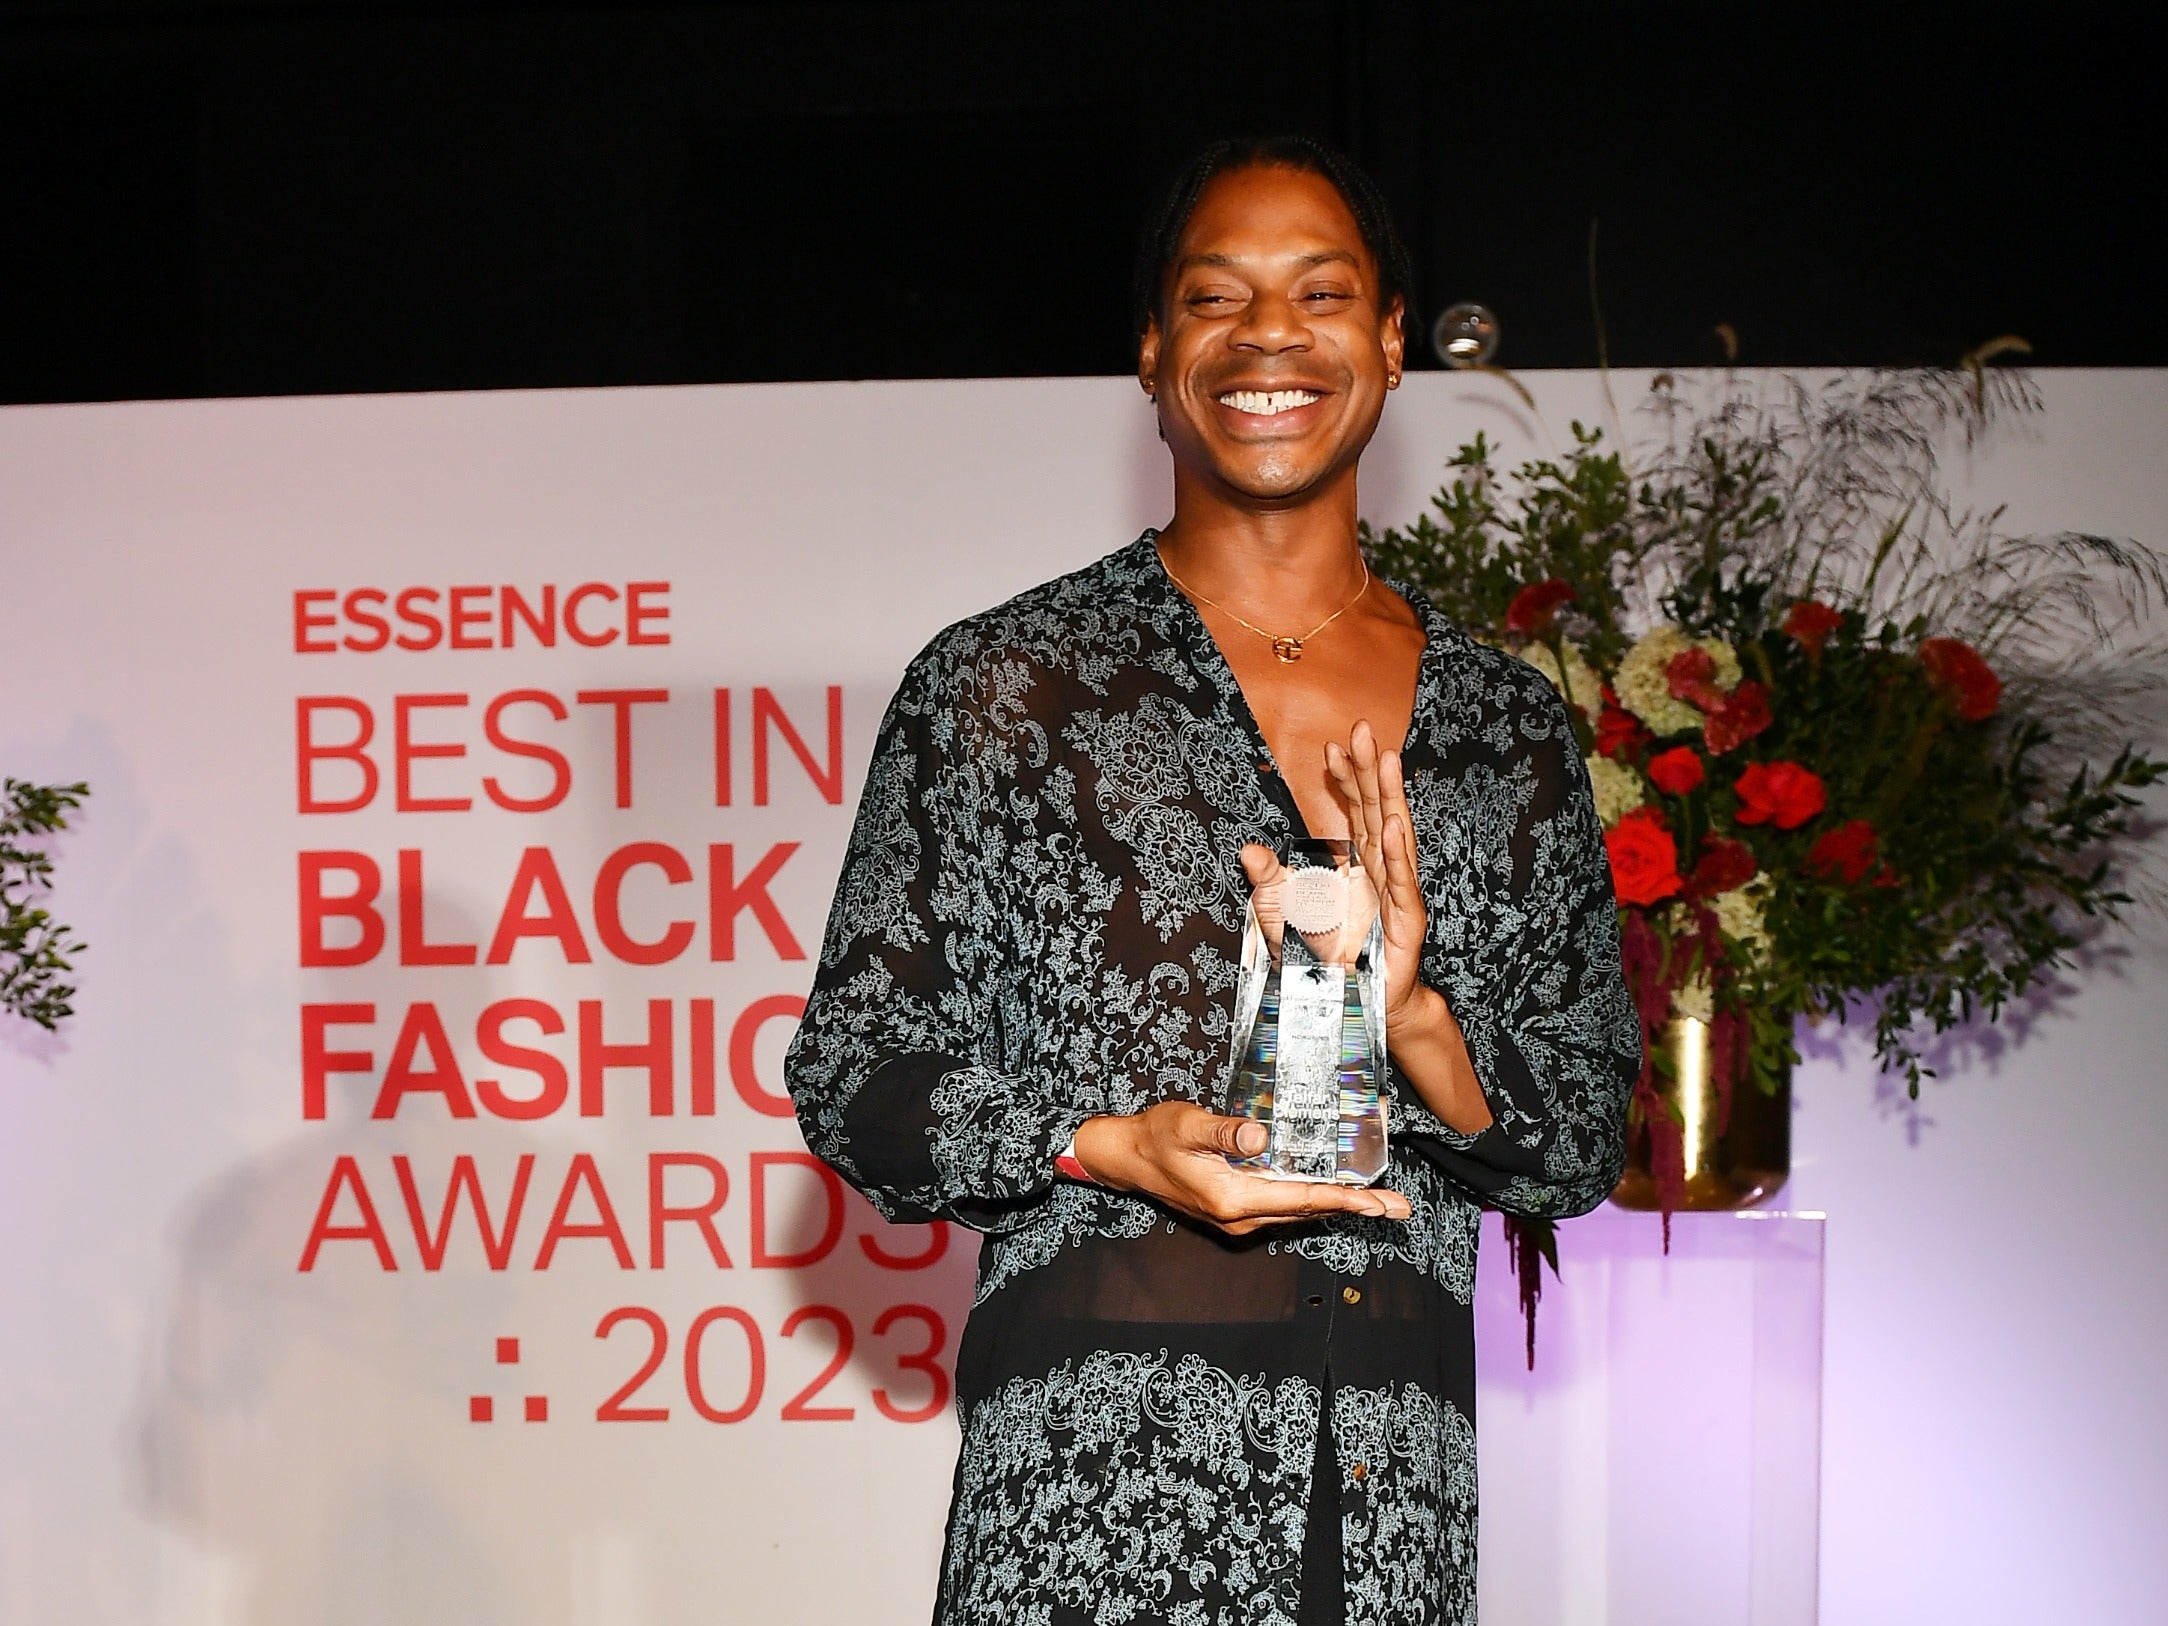 Telfar Clemens Wins Best Fashion Campaign Of The Year At ESSENCE’s Best In Black Fashion Awards Telfar Clemens Wins Best Fashion Campaign Of The Year At ESSENCE’s Best In Black Fashion Awards 